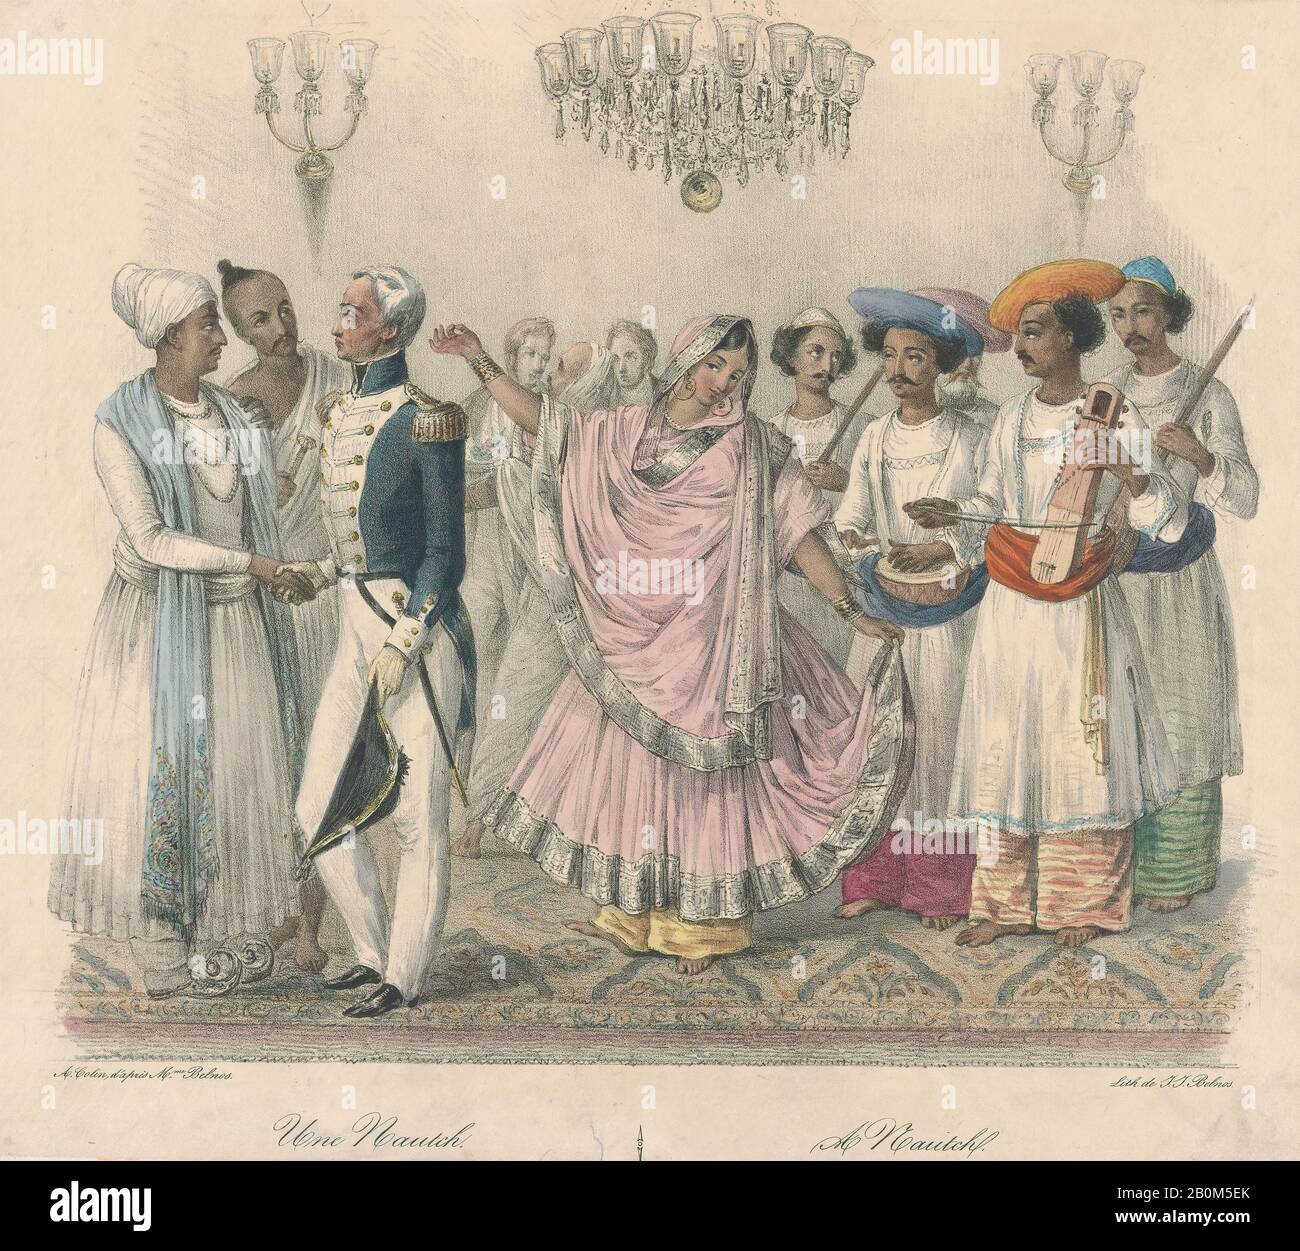 Alexandre-Marie Colin, Une Nautch; from Twenty four Plates Illustrative of Hindoo and European Manners in Bengal, Alexandre-Marie Colin (French, Paris 1798–1875 Paris), Jean Jacques Belnos (French, active 1933), after Mrs. Belnos, 1832, Hand-colored lithograph, Sheet: 10 11/16 × 12 5/16 in. (27.1 × 31.2 cm), Prints Stock Photo